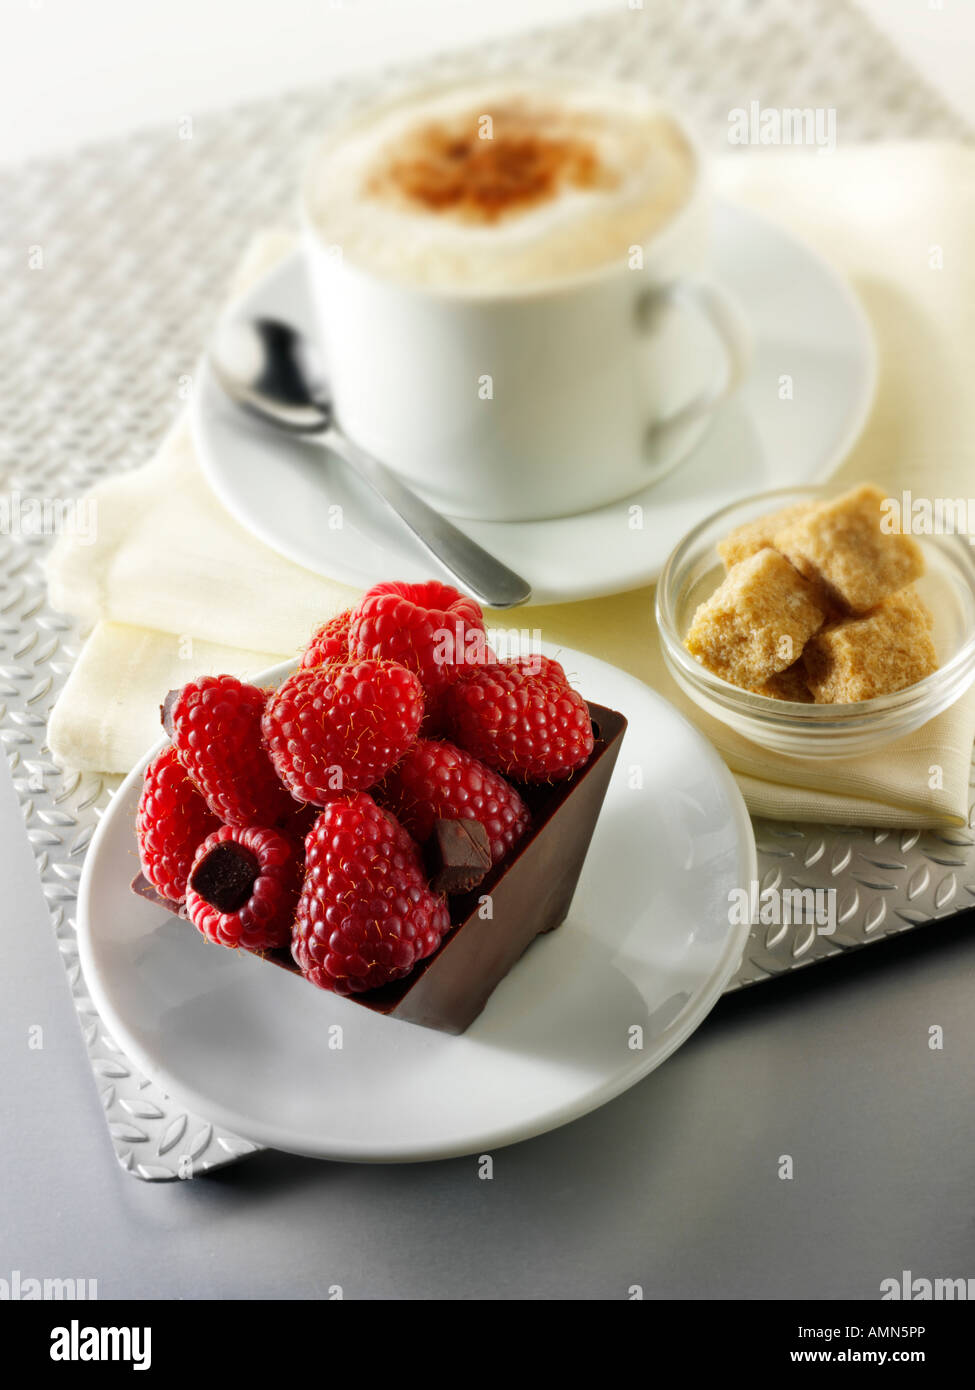 Coffee. Cappuccino with a chocolate cake filled with chocolate truffle and topped with fresh raspberries.  in a cafe setting with coffee Stock Photo